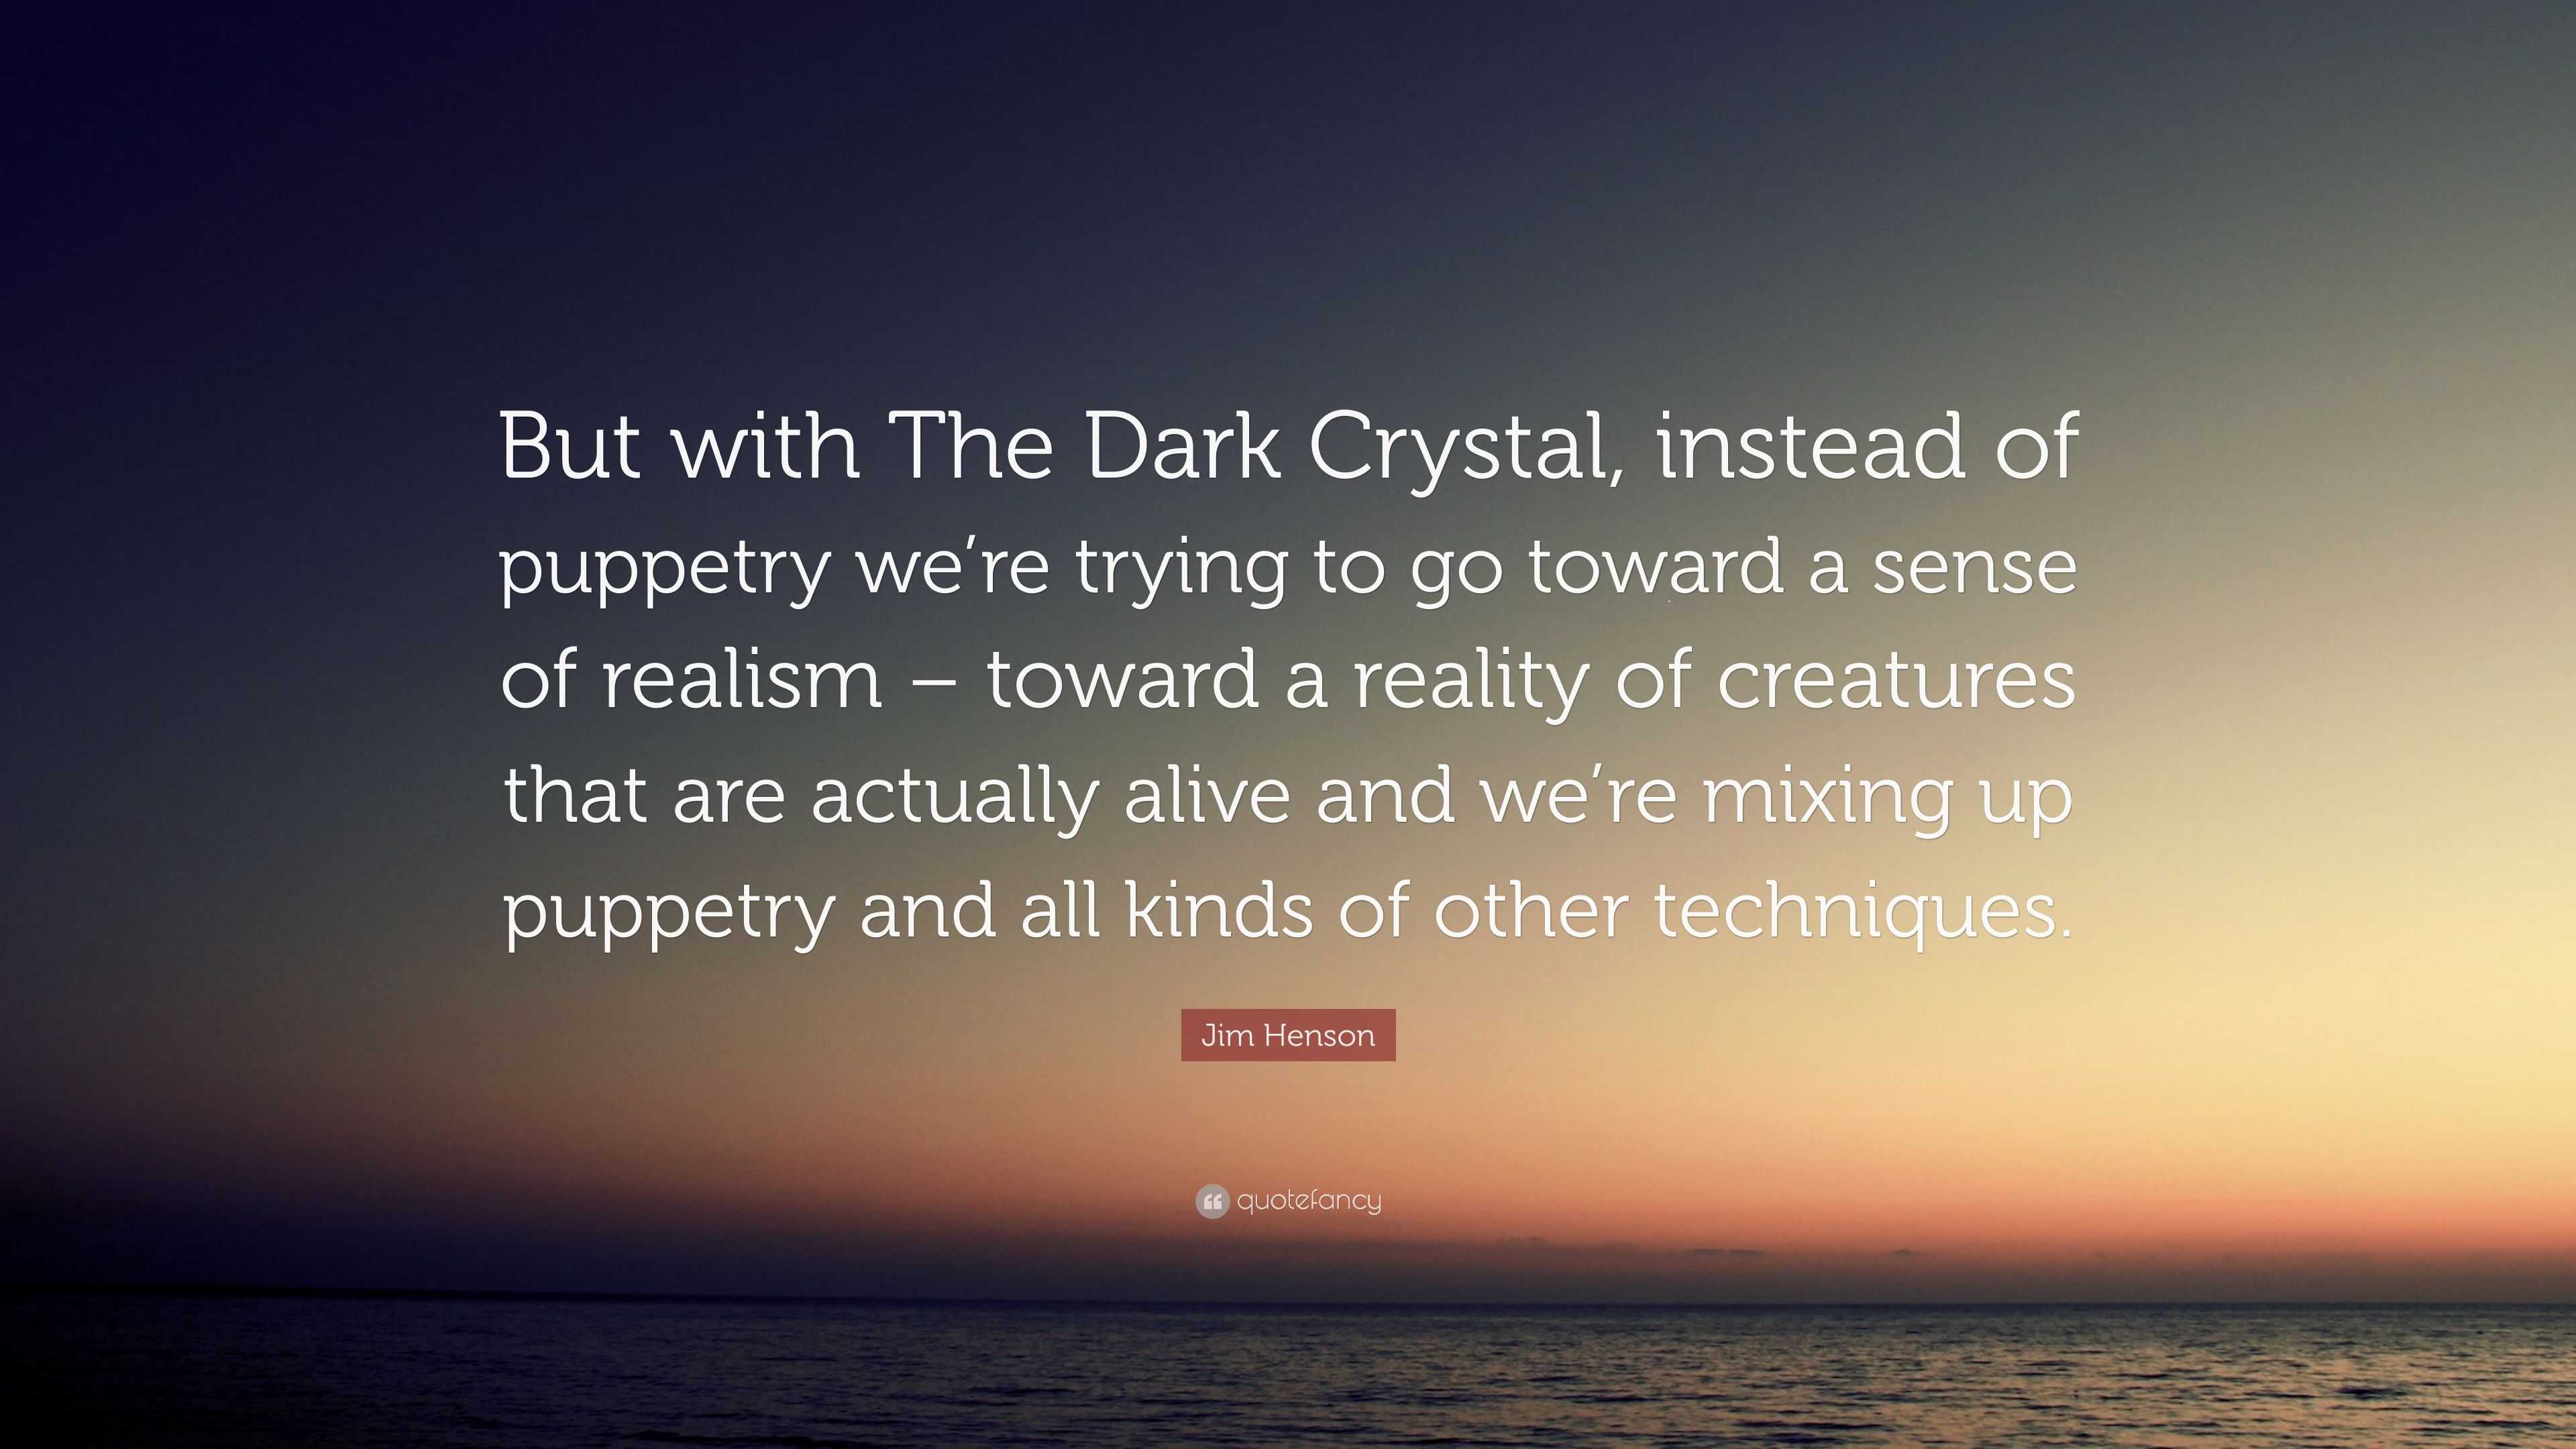 Jim Henson Quote: “But with The Dark Crystal, instead of puppetry we’re ...